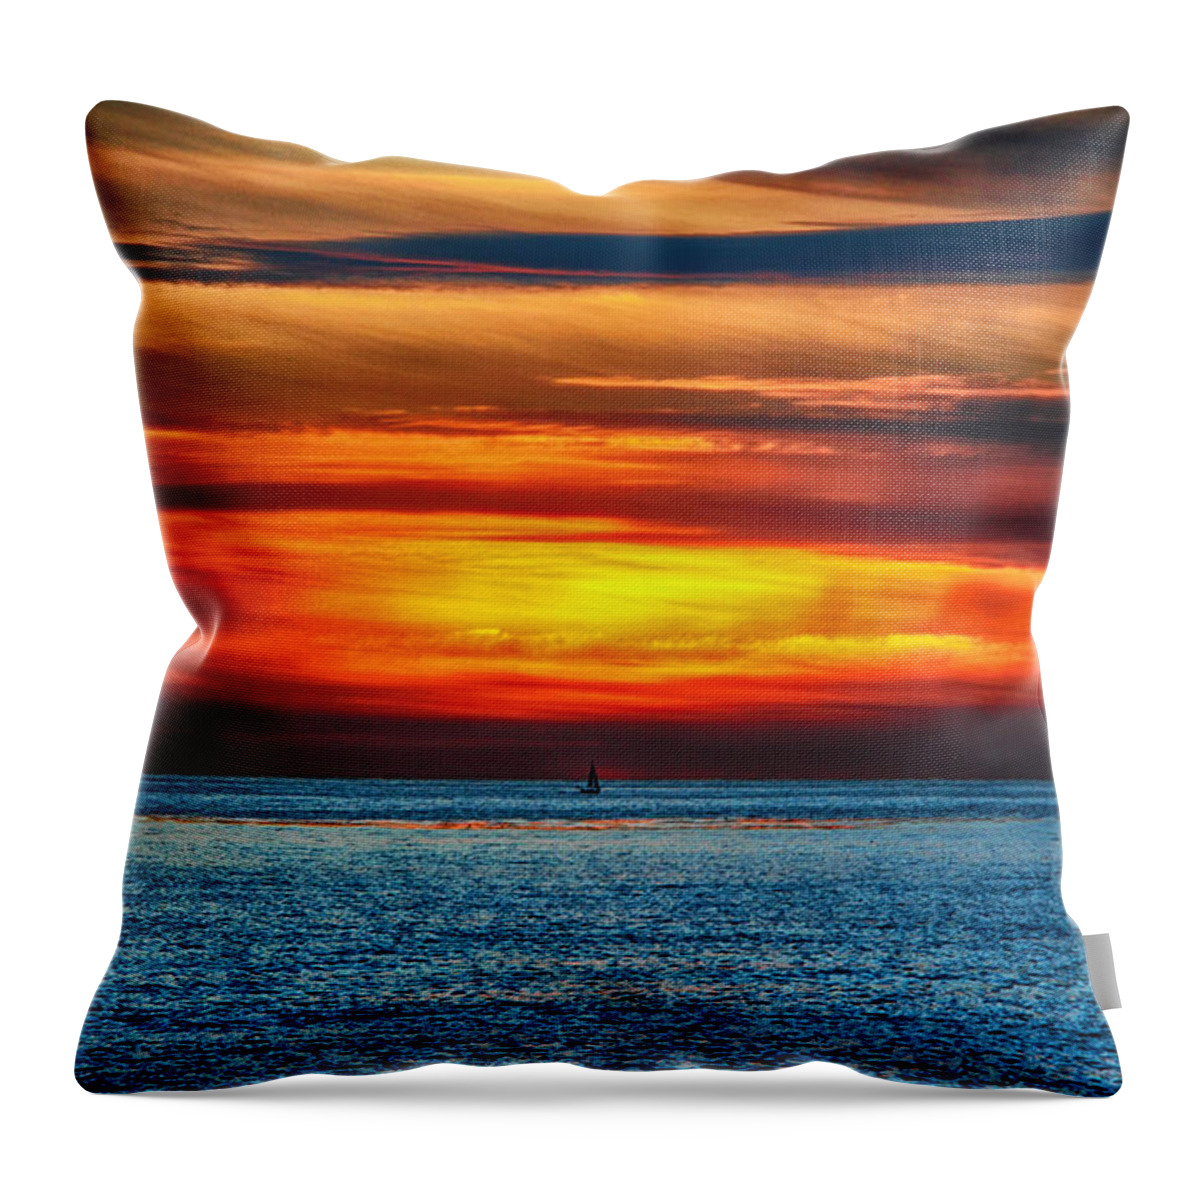 Golden Sunset Throw Pillow featuring the photograph Beach Sunset and Boat by Mariola Bitner